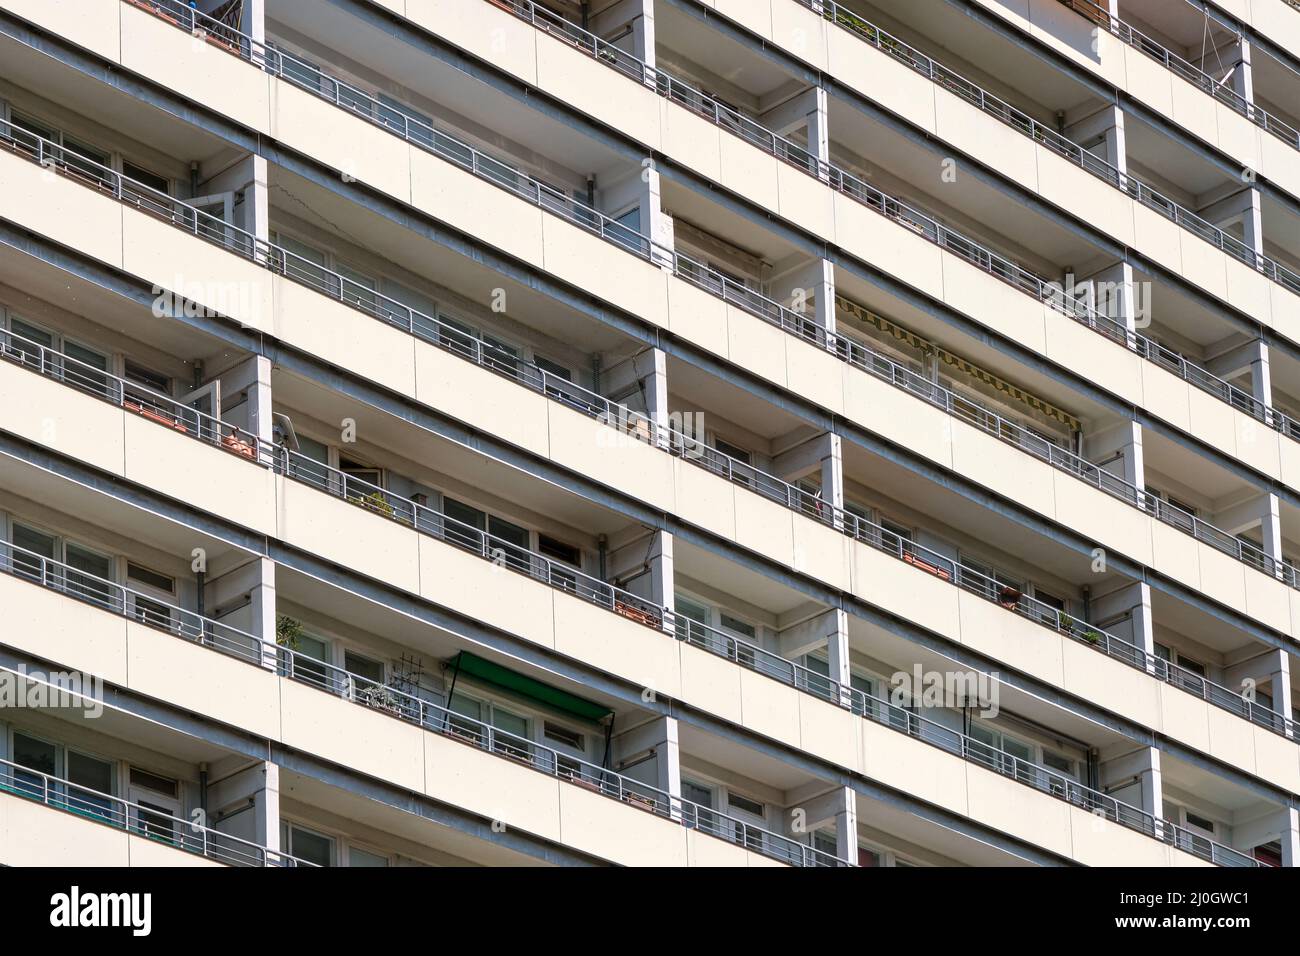 Detail of a subsidized housing building seen in Berlin, Germany Stock Photo